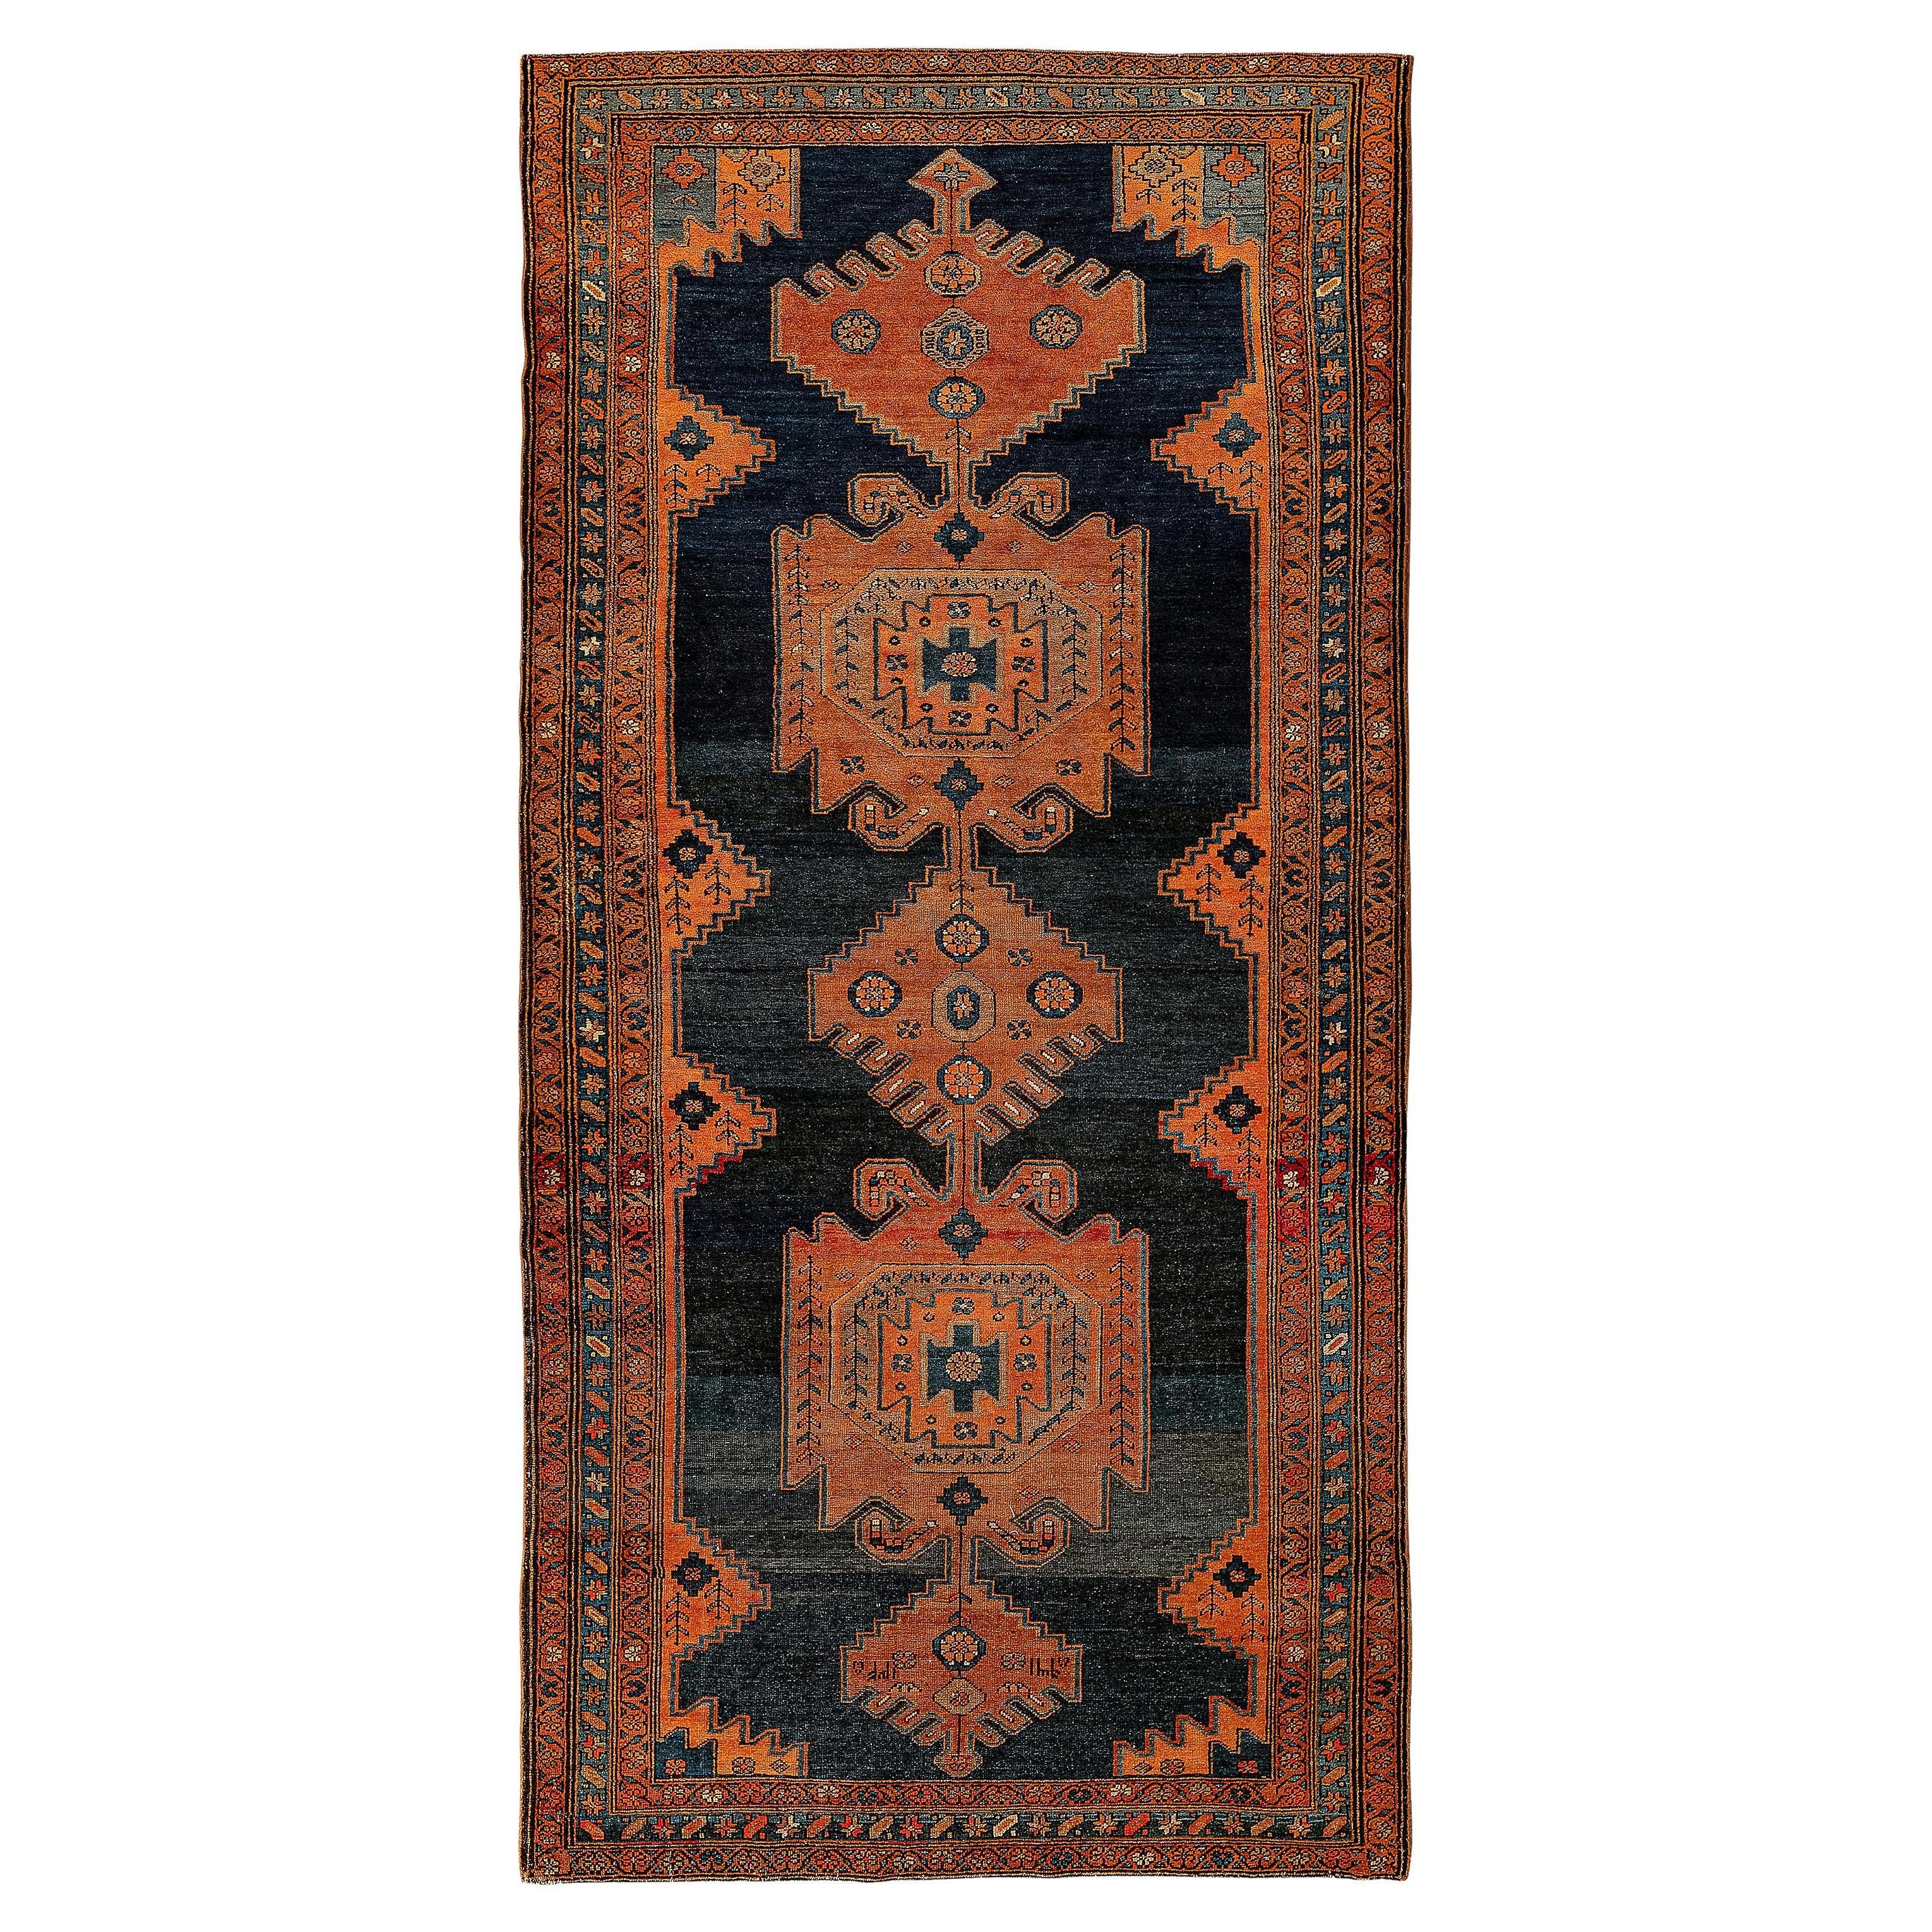 Malayer – Northwest Persia

Persian gallery from the end of the 19th century. It is of excellent wool quality and is in perfect condition. This Malayer features a row of four connected orange medallions arranged in the central field under a